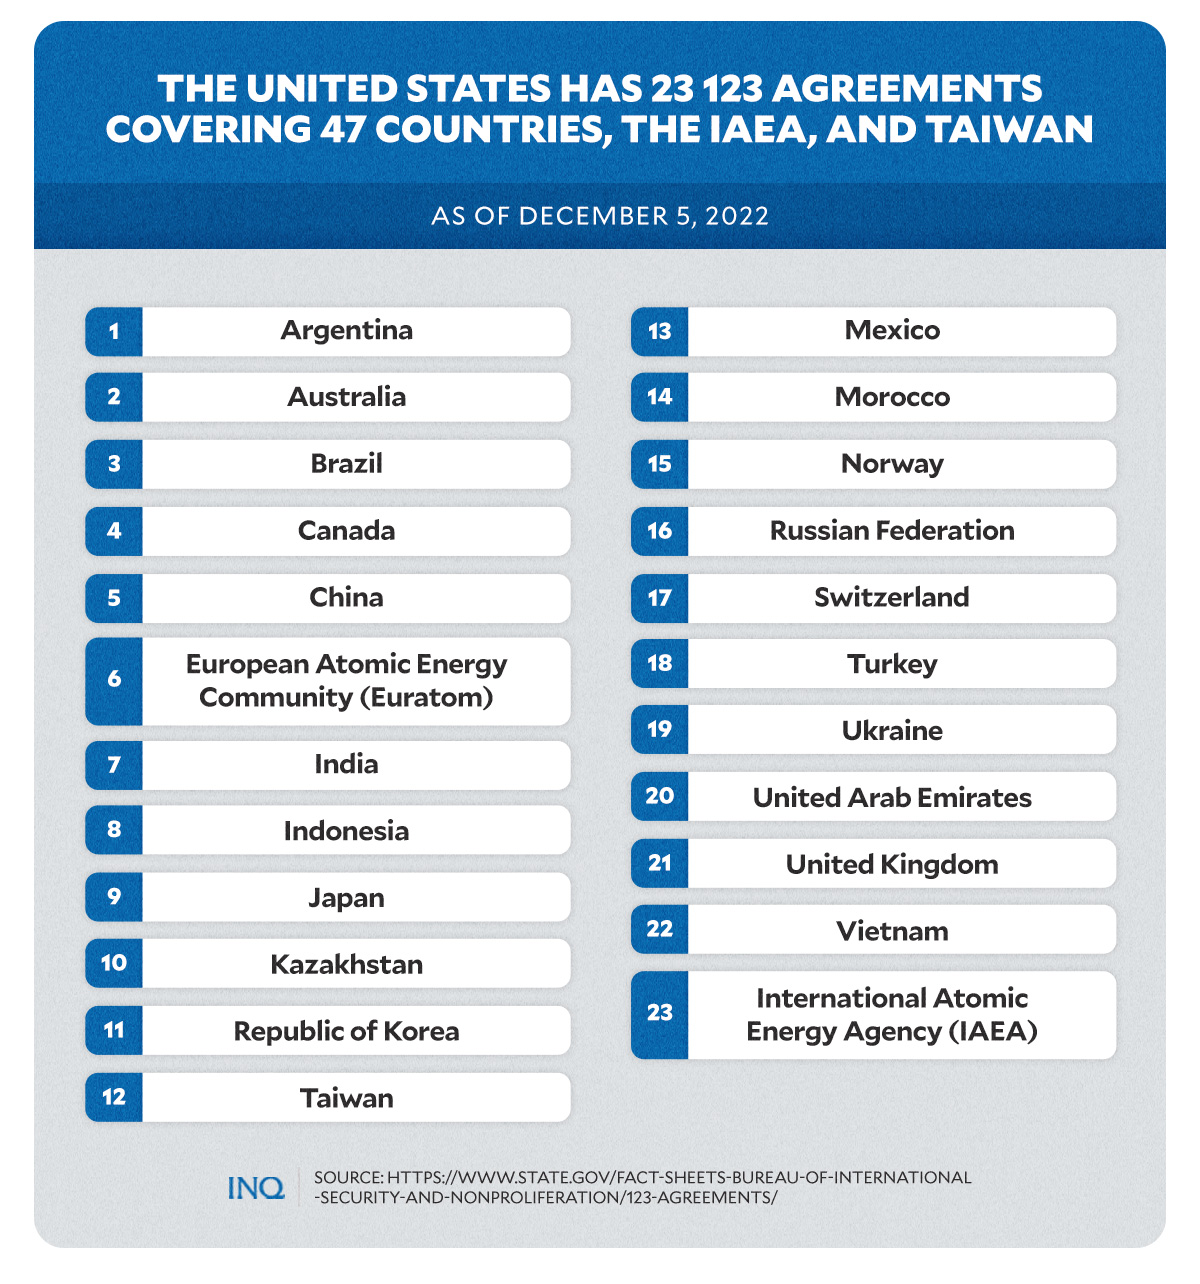 The united states has 23 123 agreements covering 47 countries, the IAEA, and Taiwan